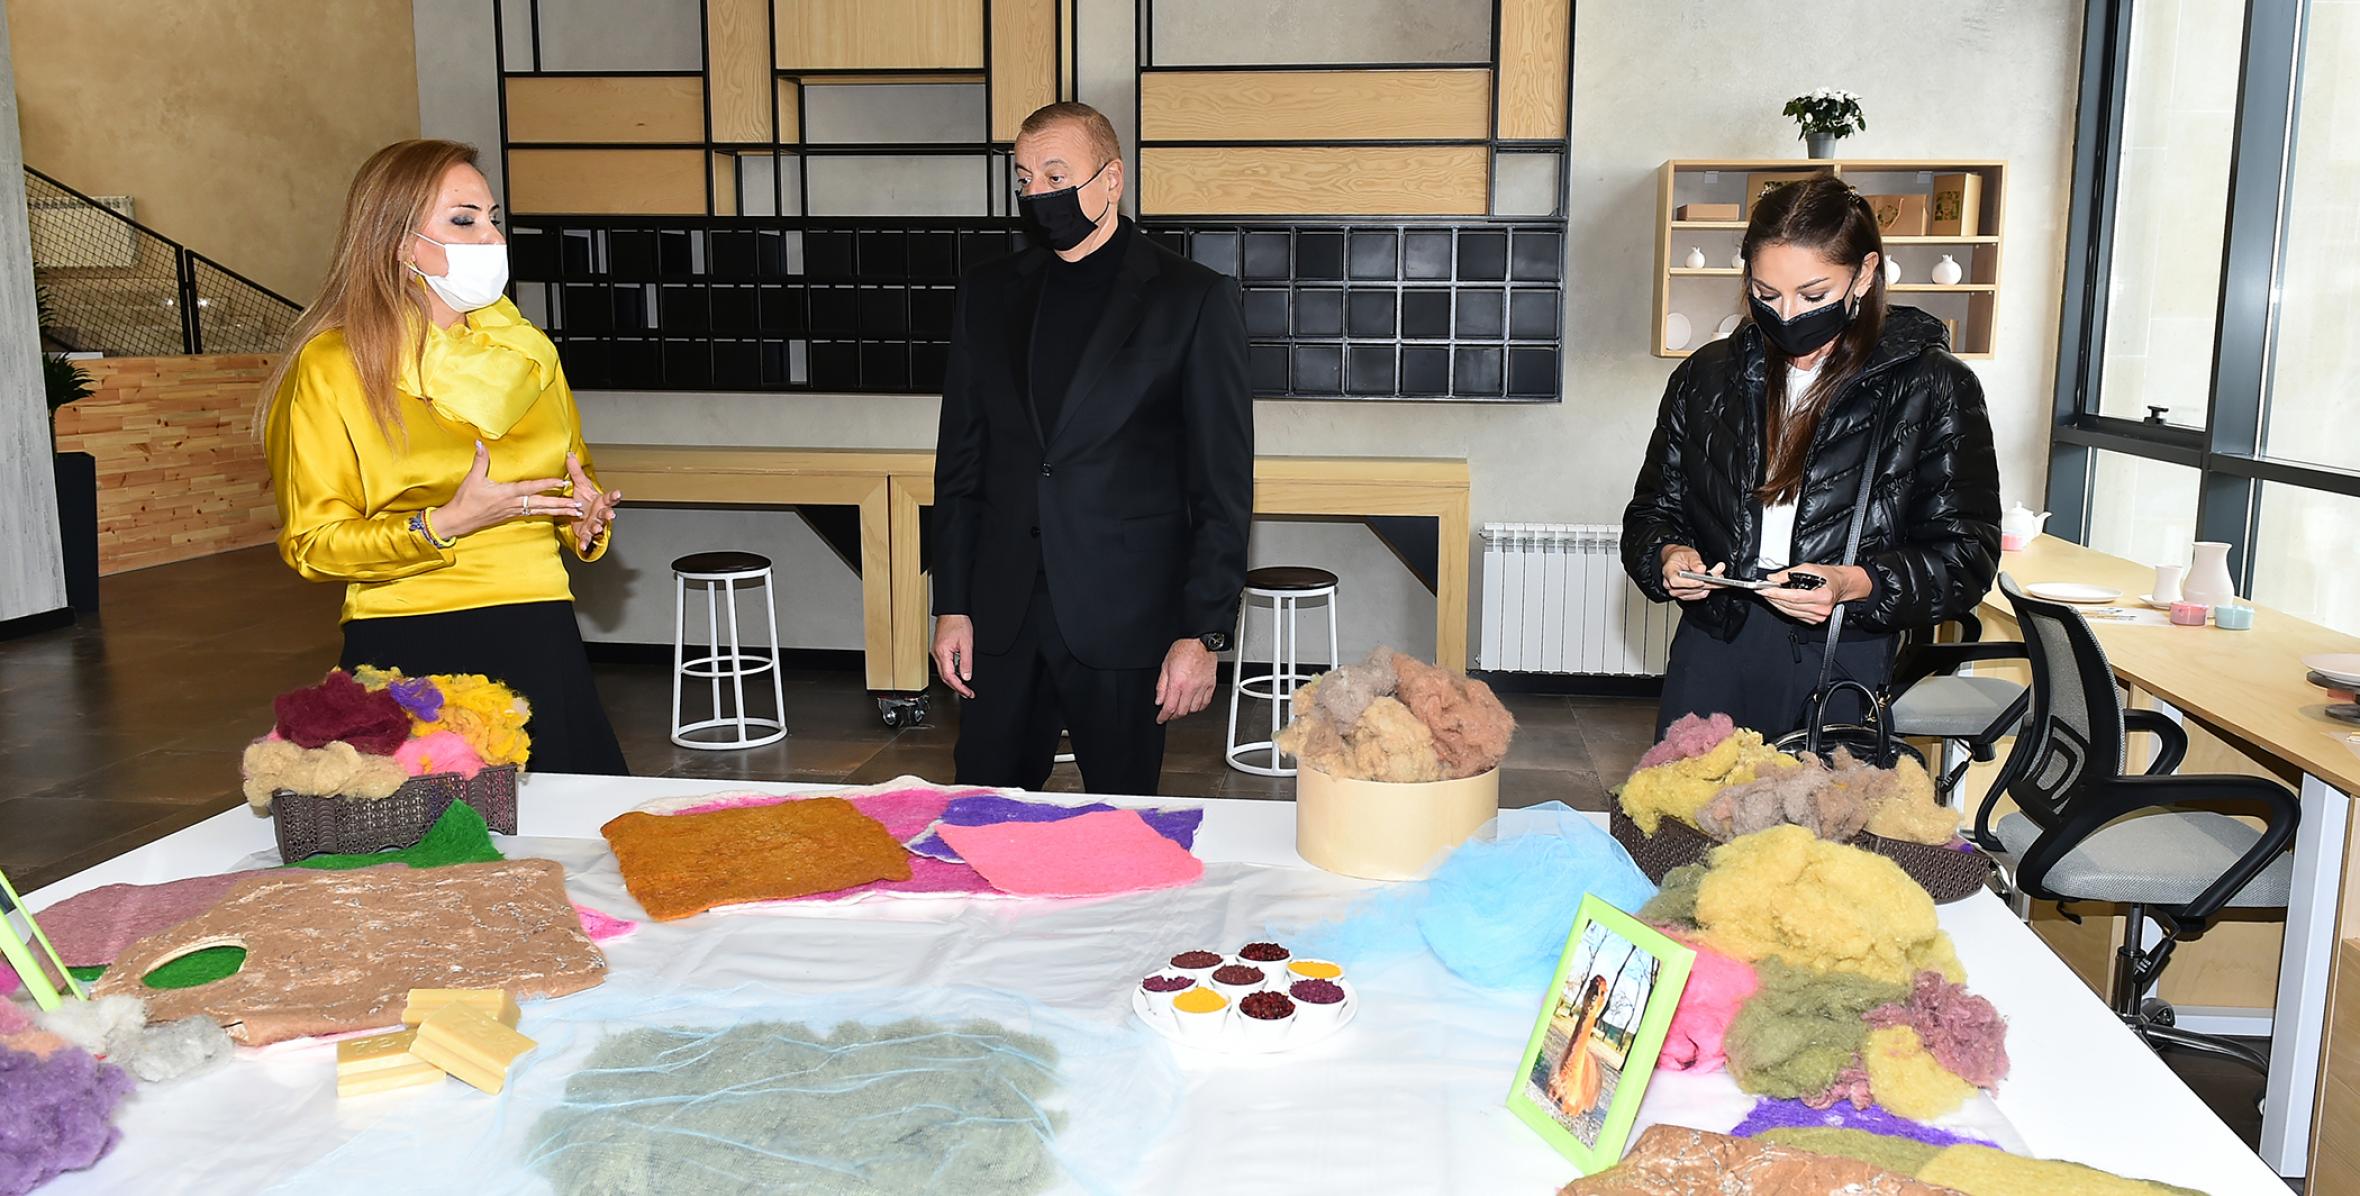 Ilham Aliyev and First Lady Mehriban Aliyeva attended the inauguration of the Creativity Center established